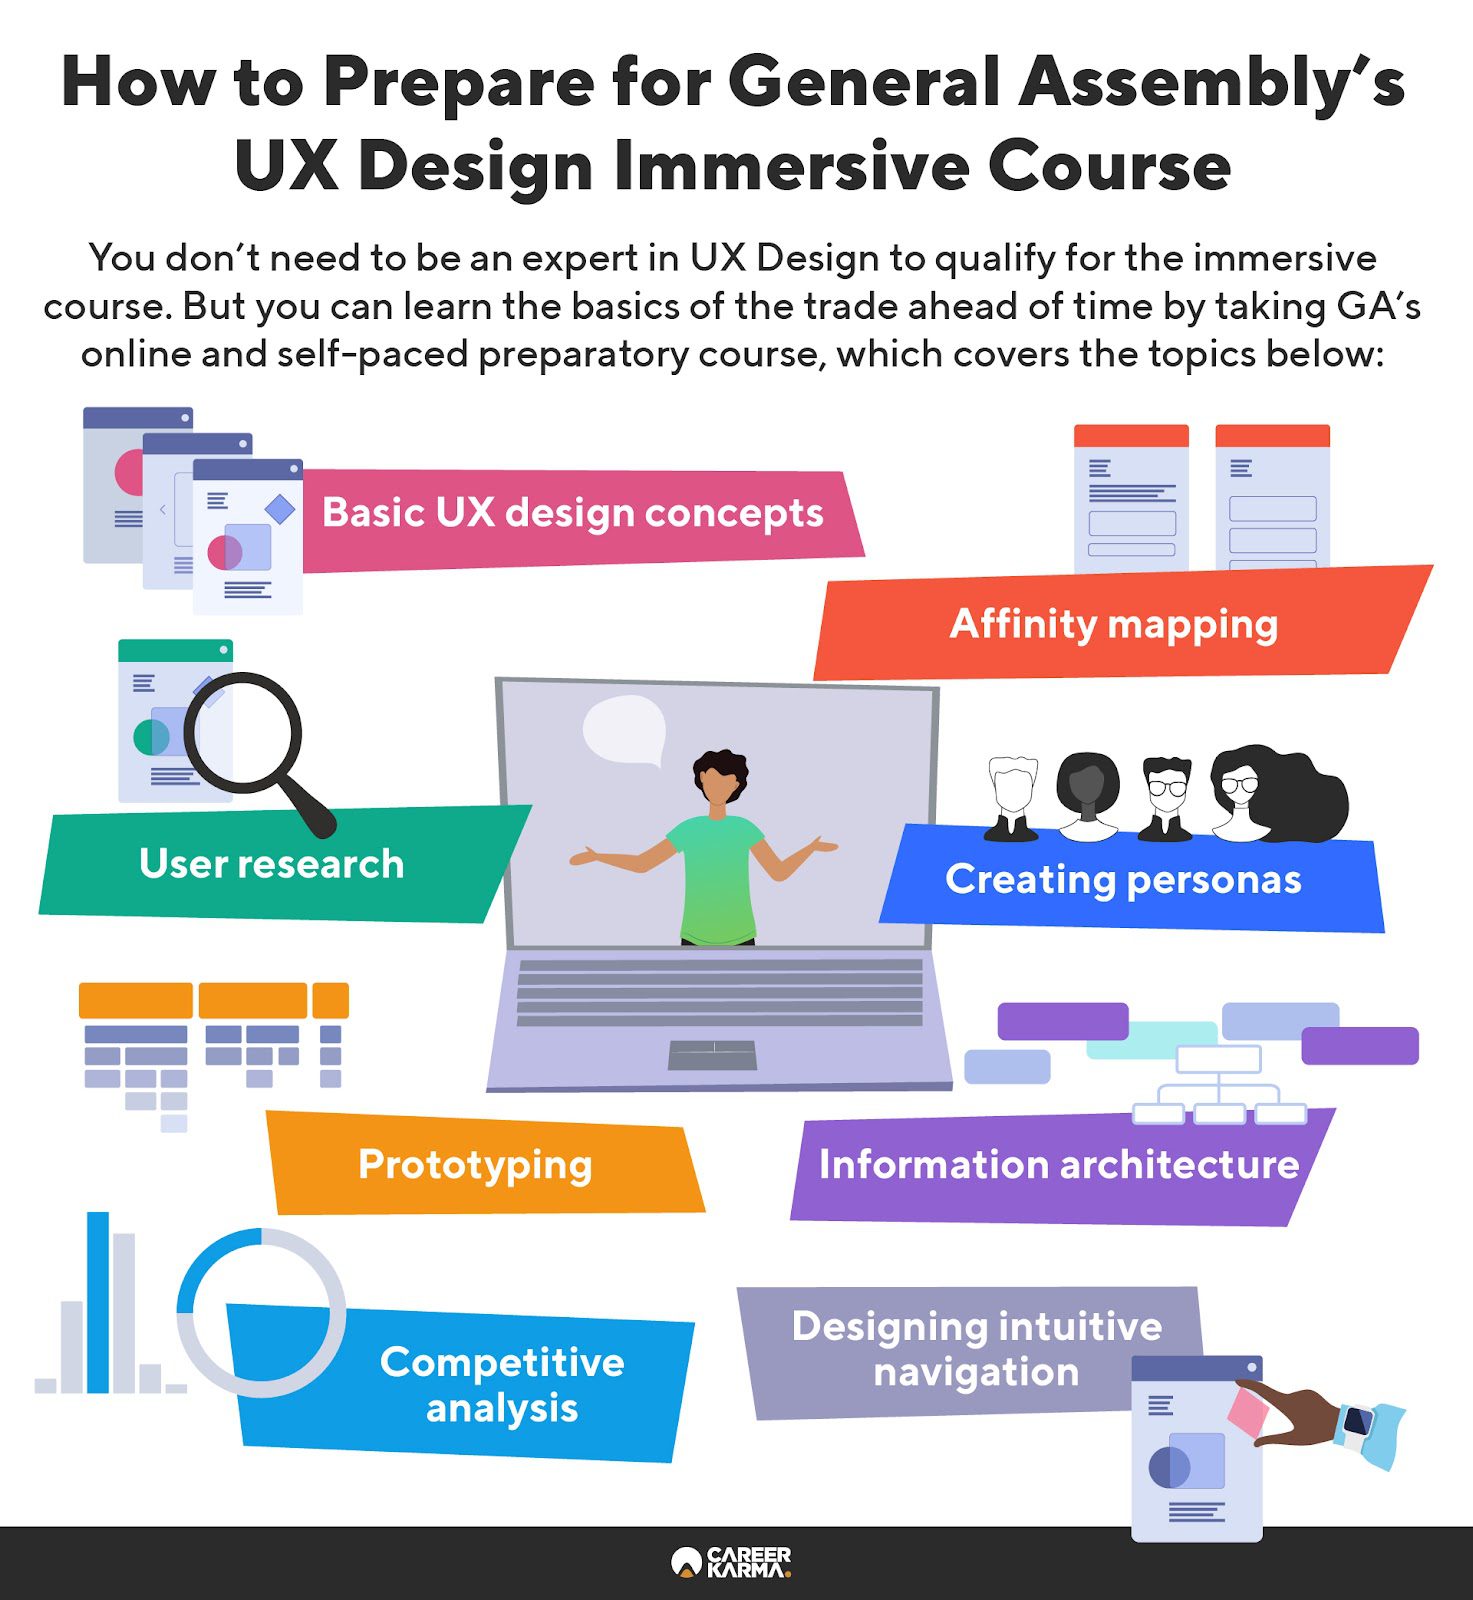 An infographic highlighting topics covered in General Assembly’s prep course for the UX Design Immersive Program